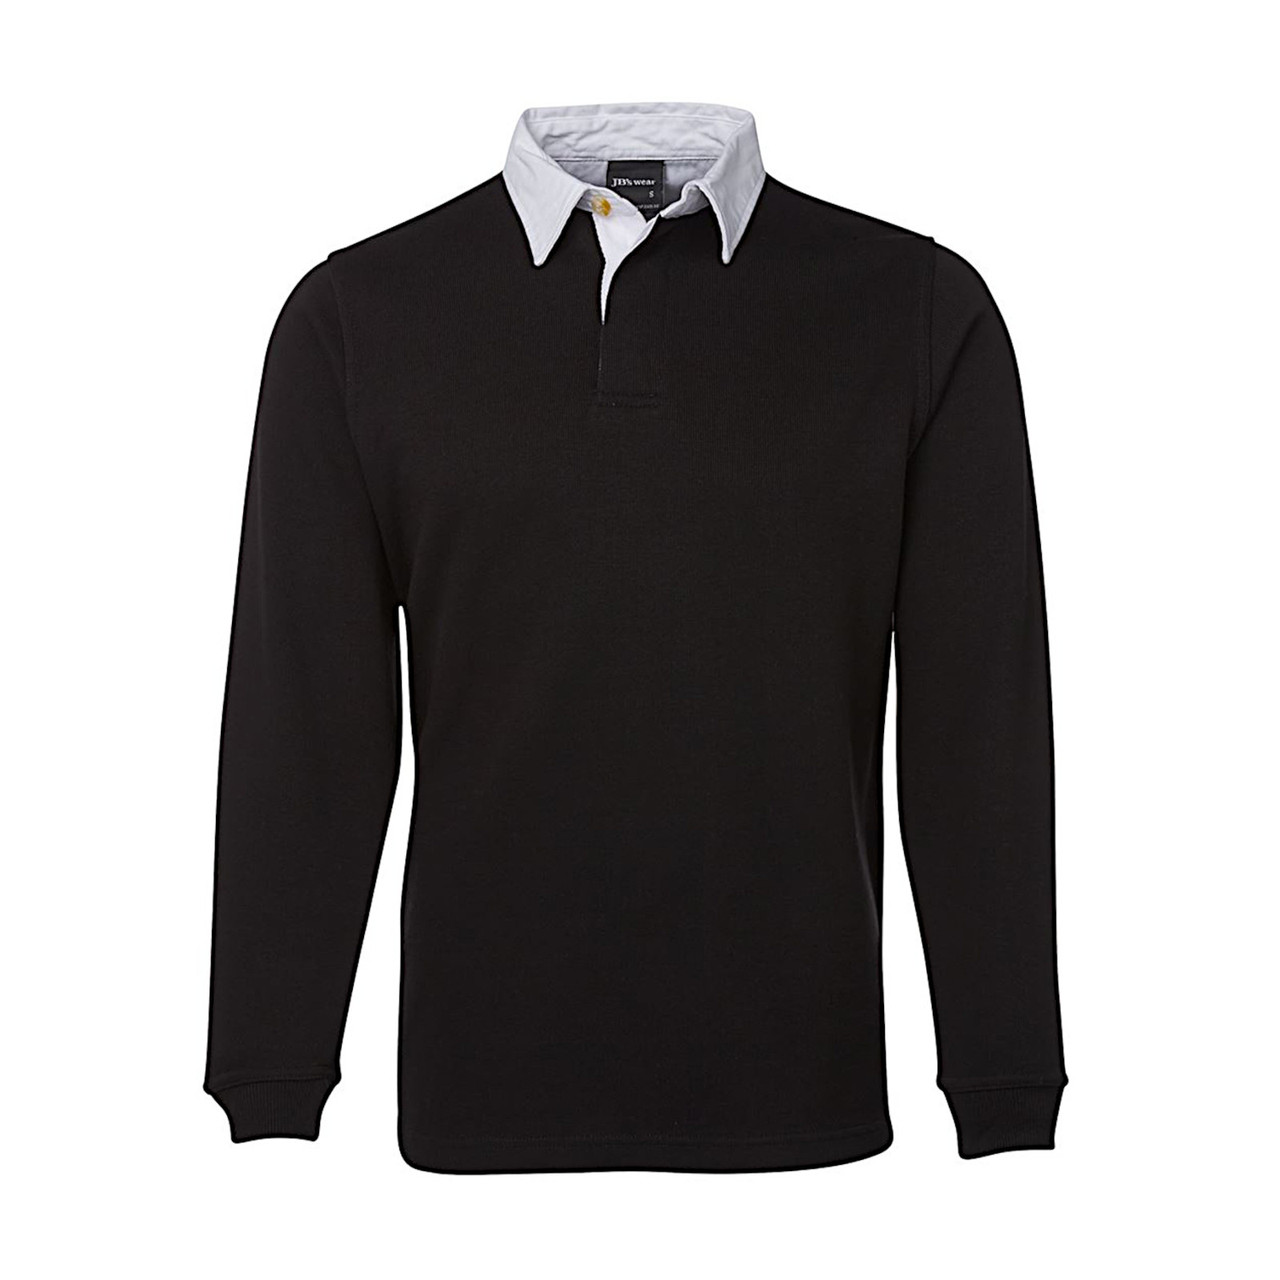 Shop Classic Plain Poly/Cotton Rugby Shirt | Buy Blank Clothing Online